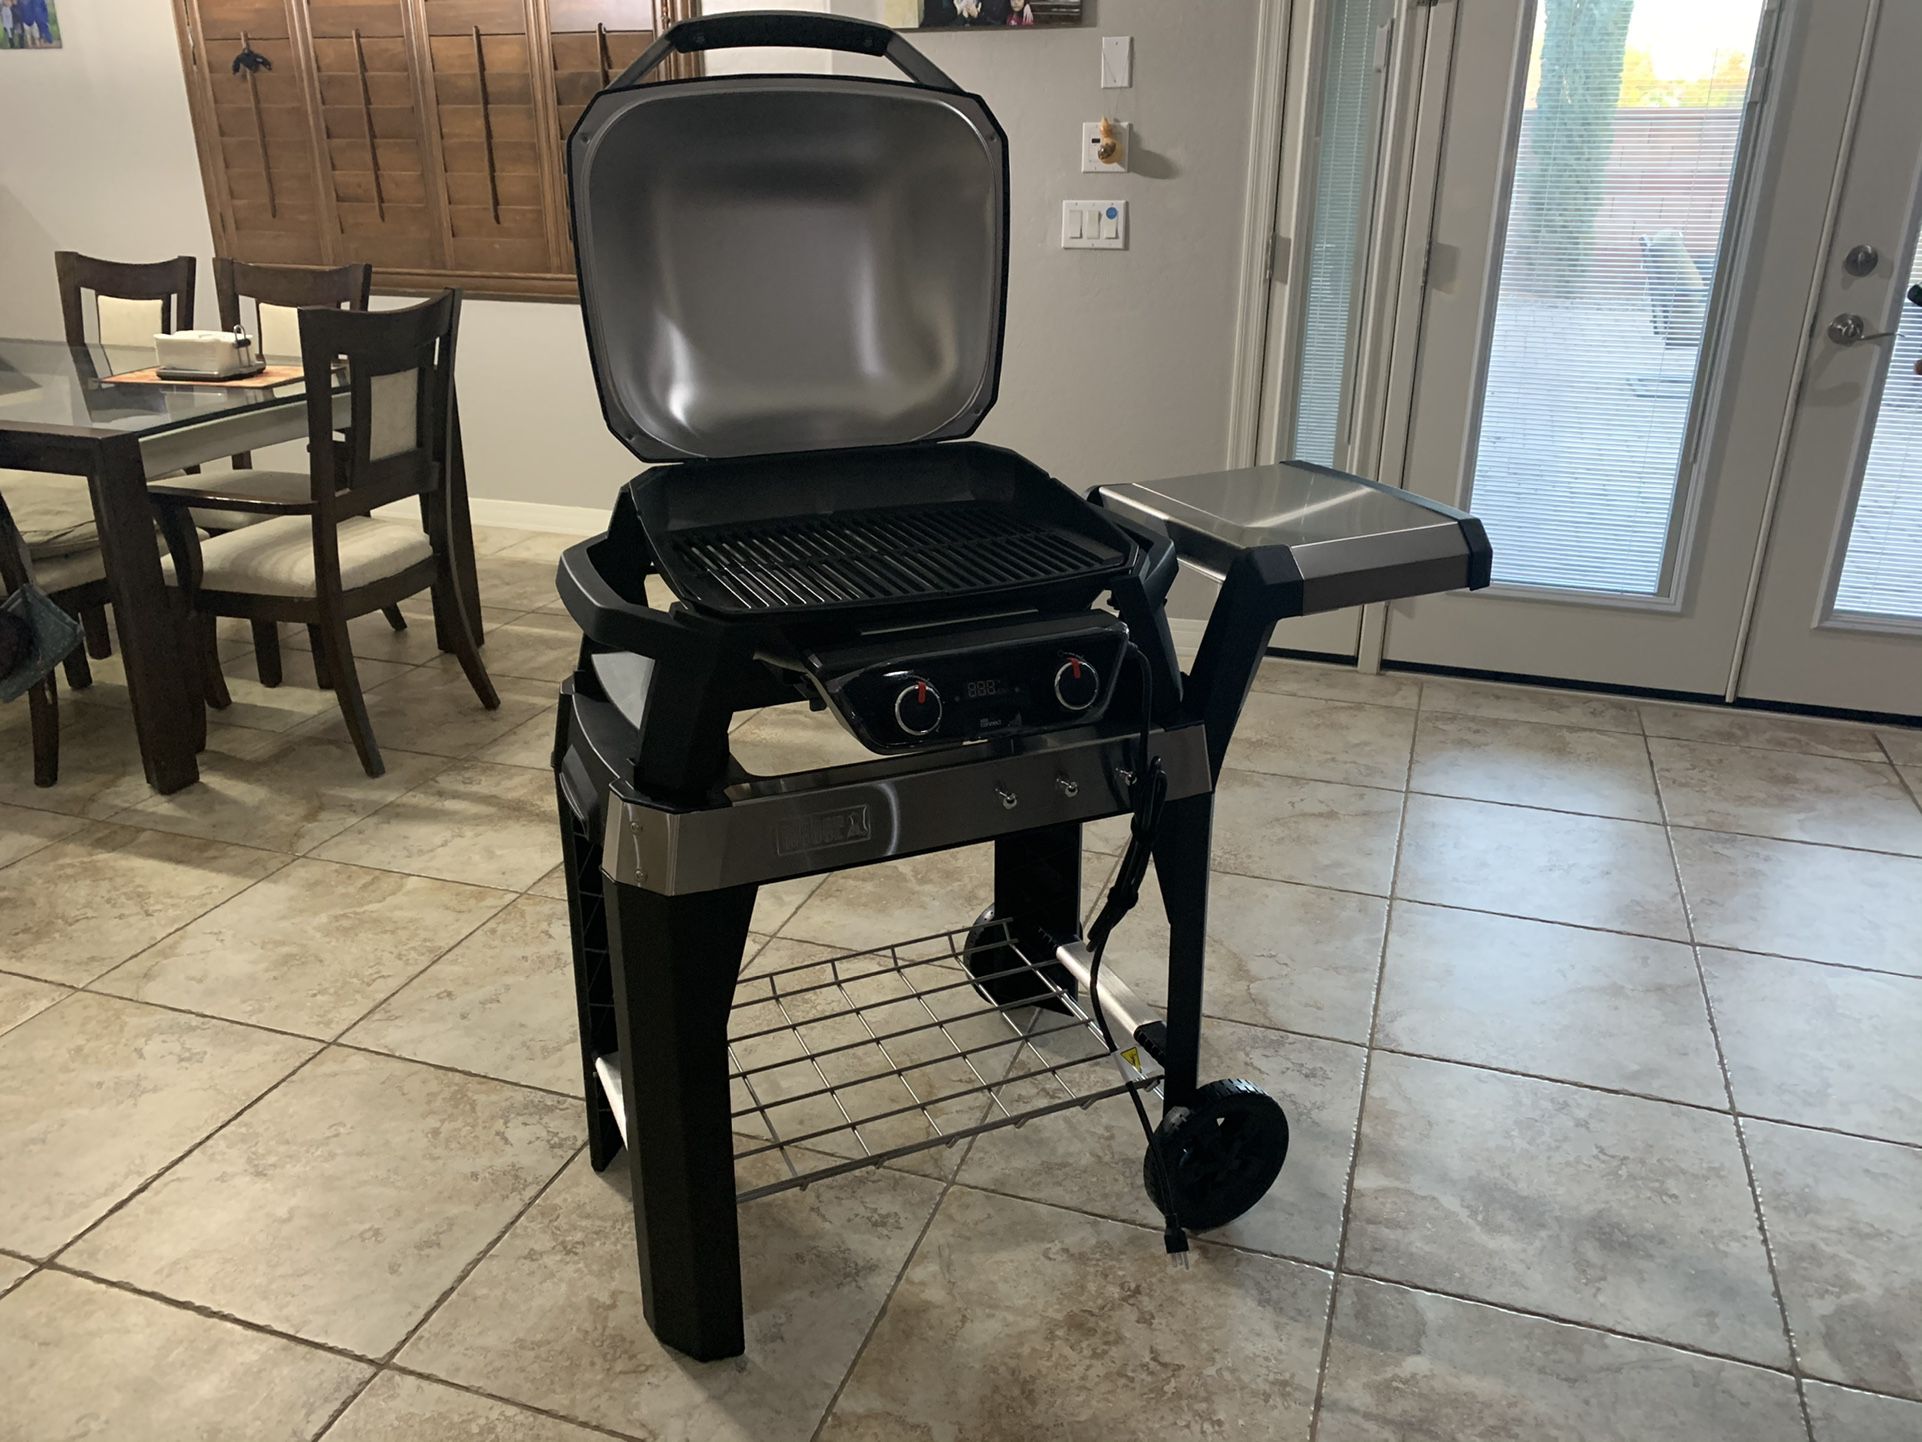 Weber Grill Pulse 2000 Smart Grill with for Sale in AZ - OfferUp